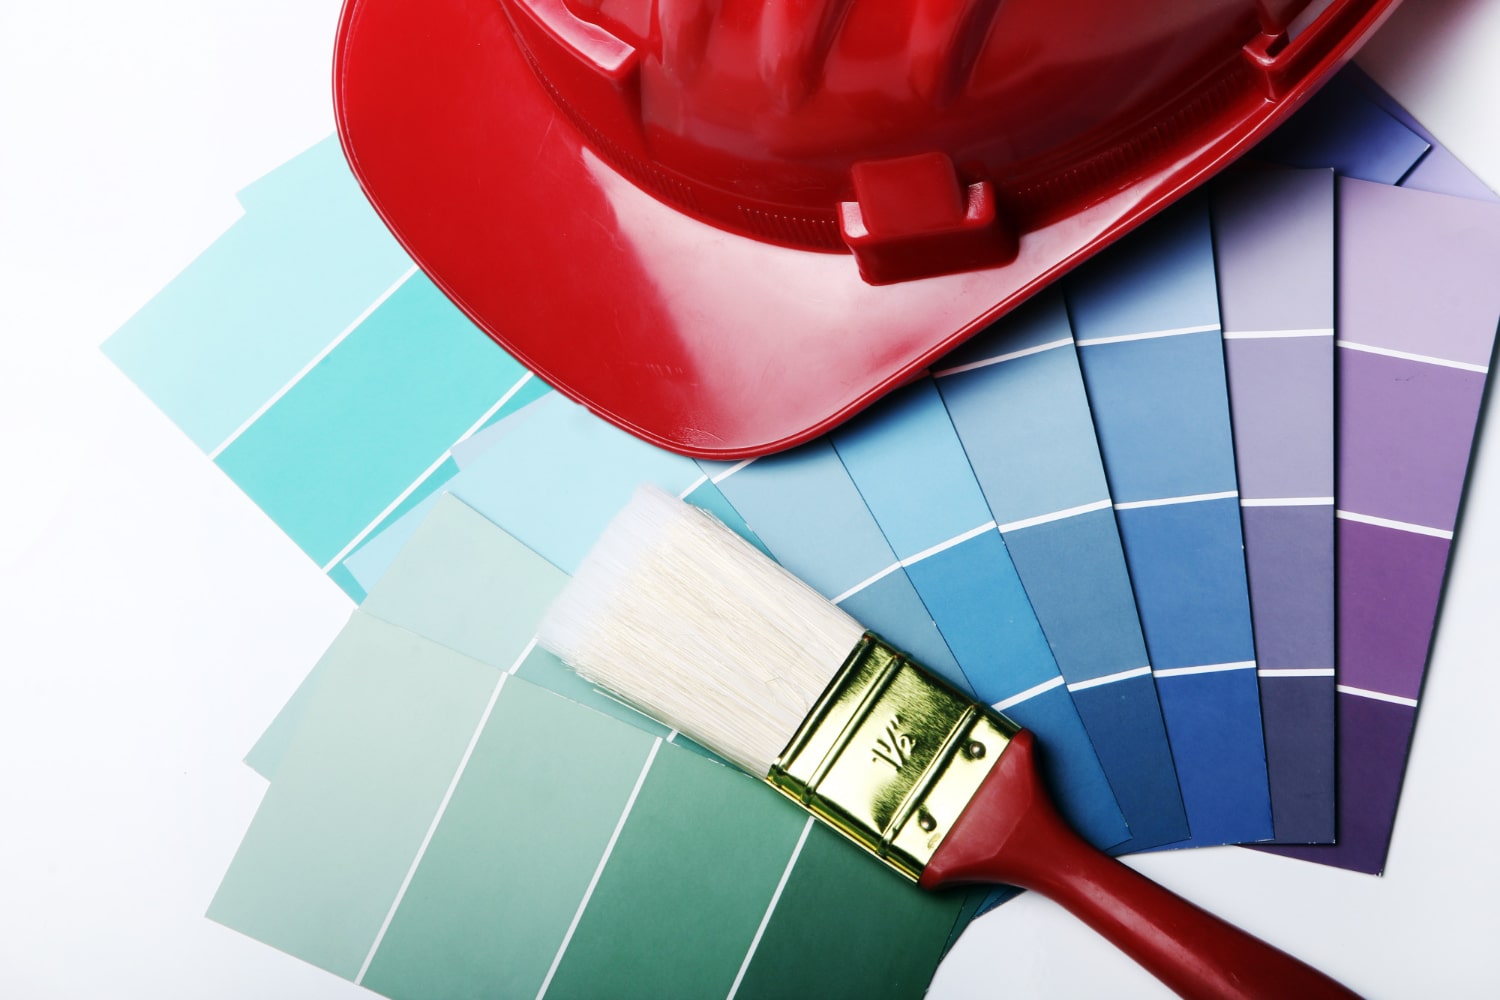 10 Paint Colors That Will Make Your Home Last Through All Seasons